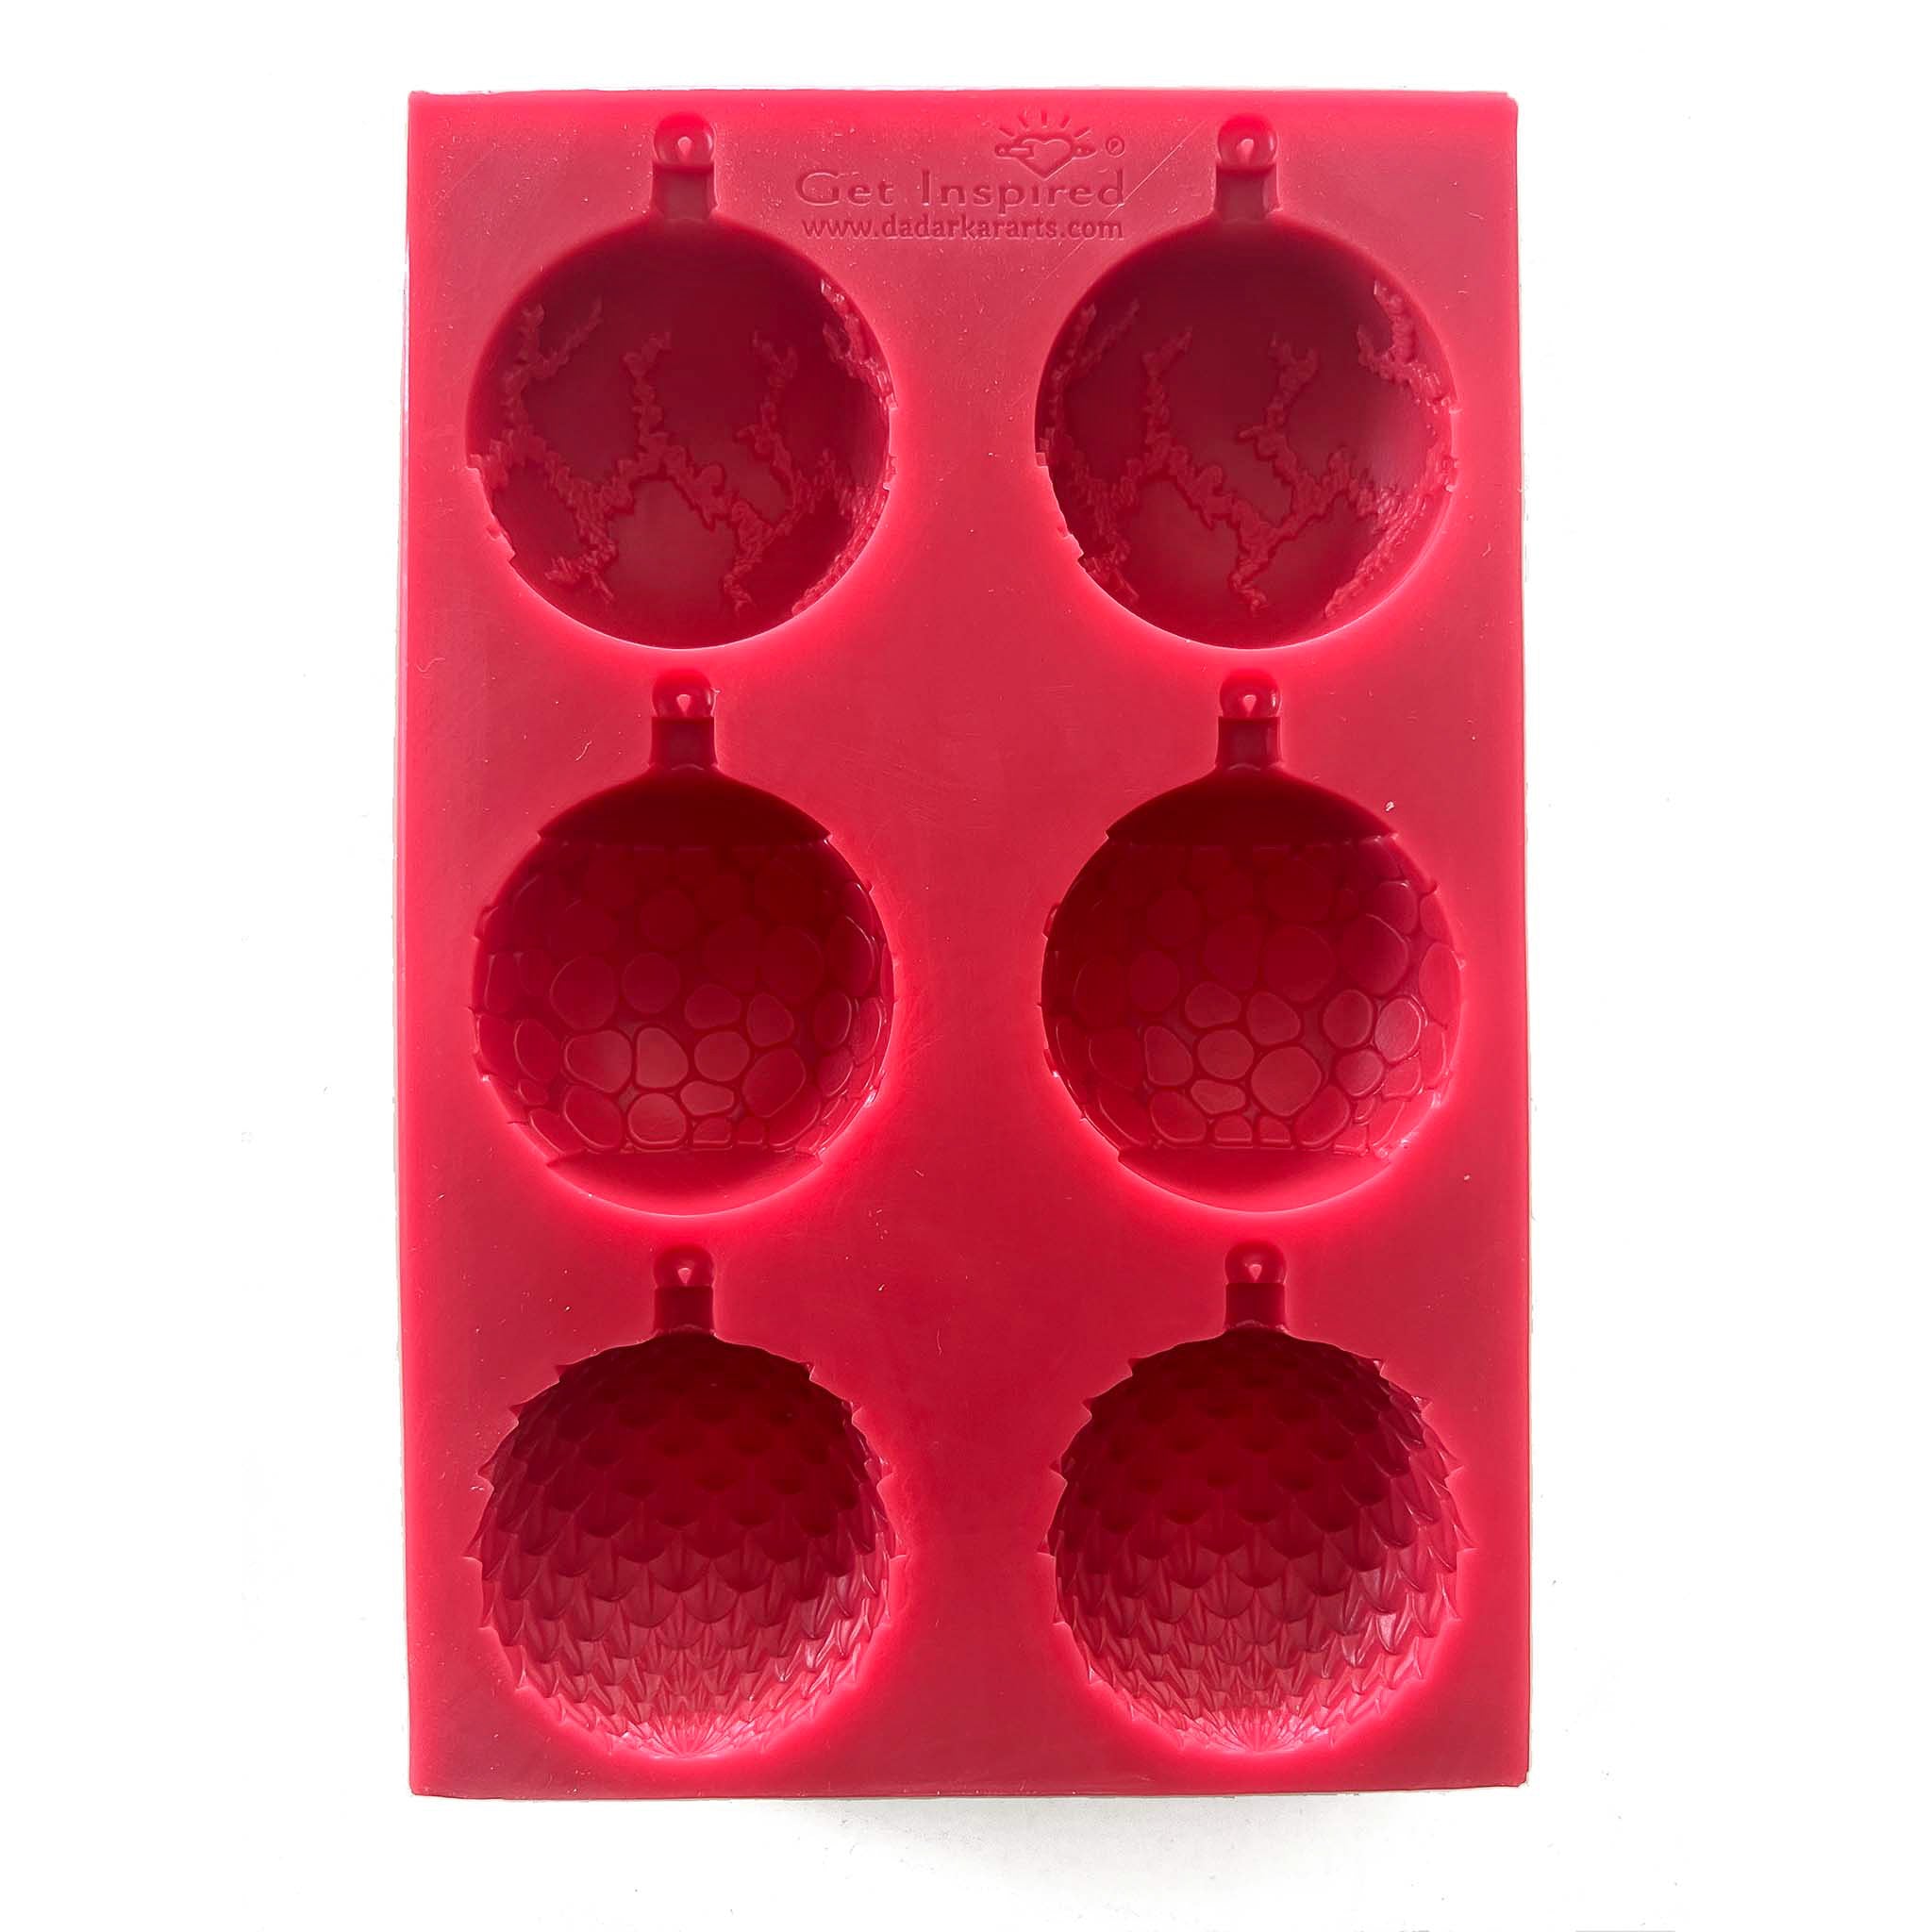 A red silicone mould of Get Inspired by Dadarkar Art's Christmas Ornaments is against a white background.